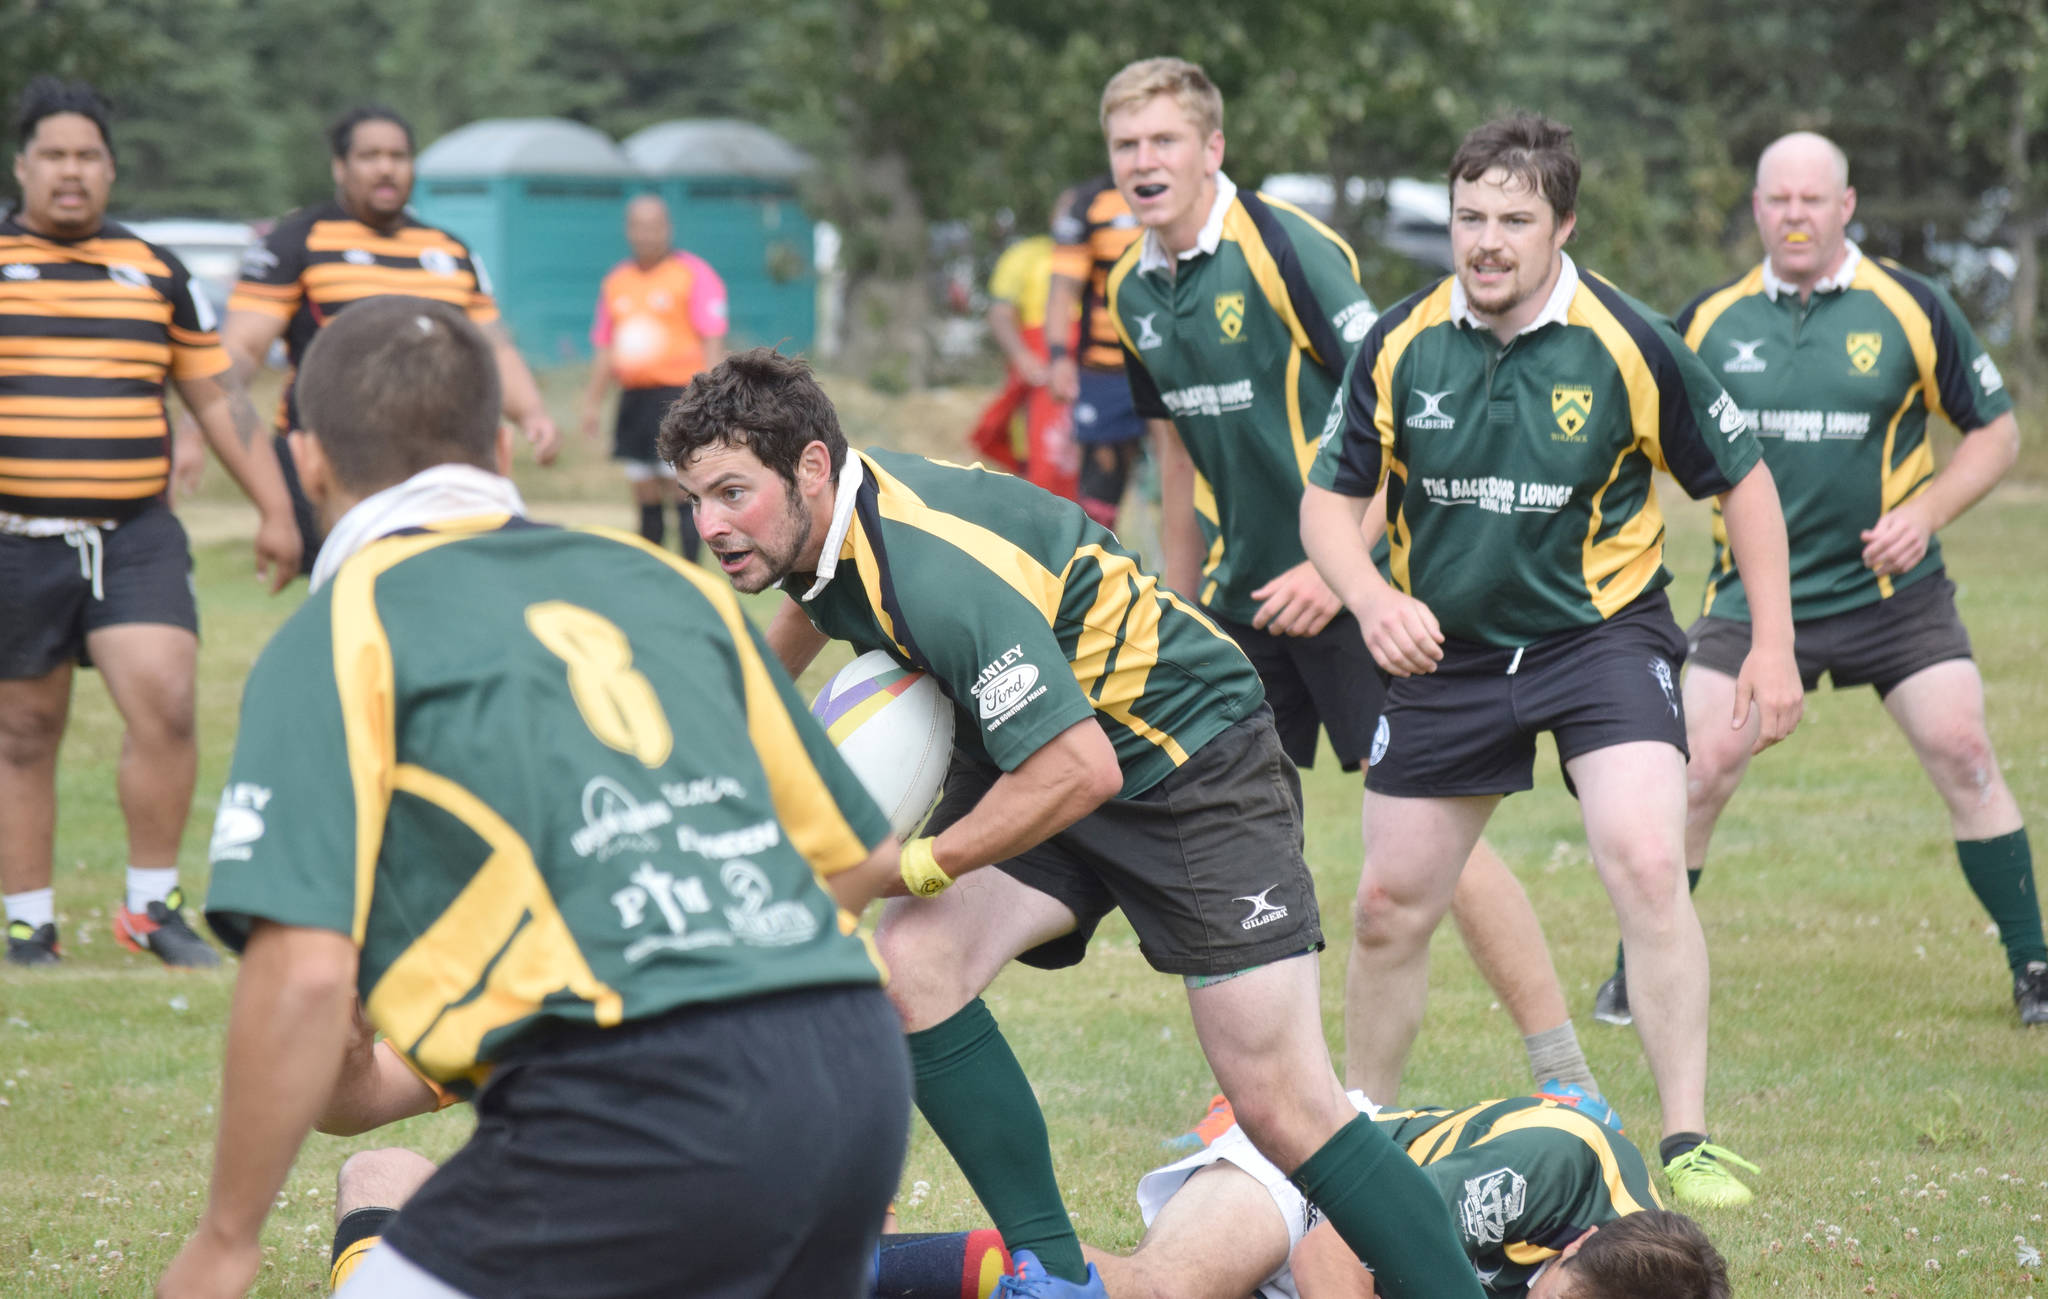 Dan Balmer of Kenai Wolfpack Rugby carries the ball Saturday, July 20, 2019, during the Kenai Dipnet Fest Rugby 10’s Tournament in Kenai. Balmer is backed by teammates, from left to right, Will Steffe, Austin Danielson and Clay Beck. (Photo by Jeff Helminiak/Peninsula Clarion)